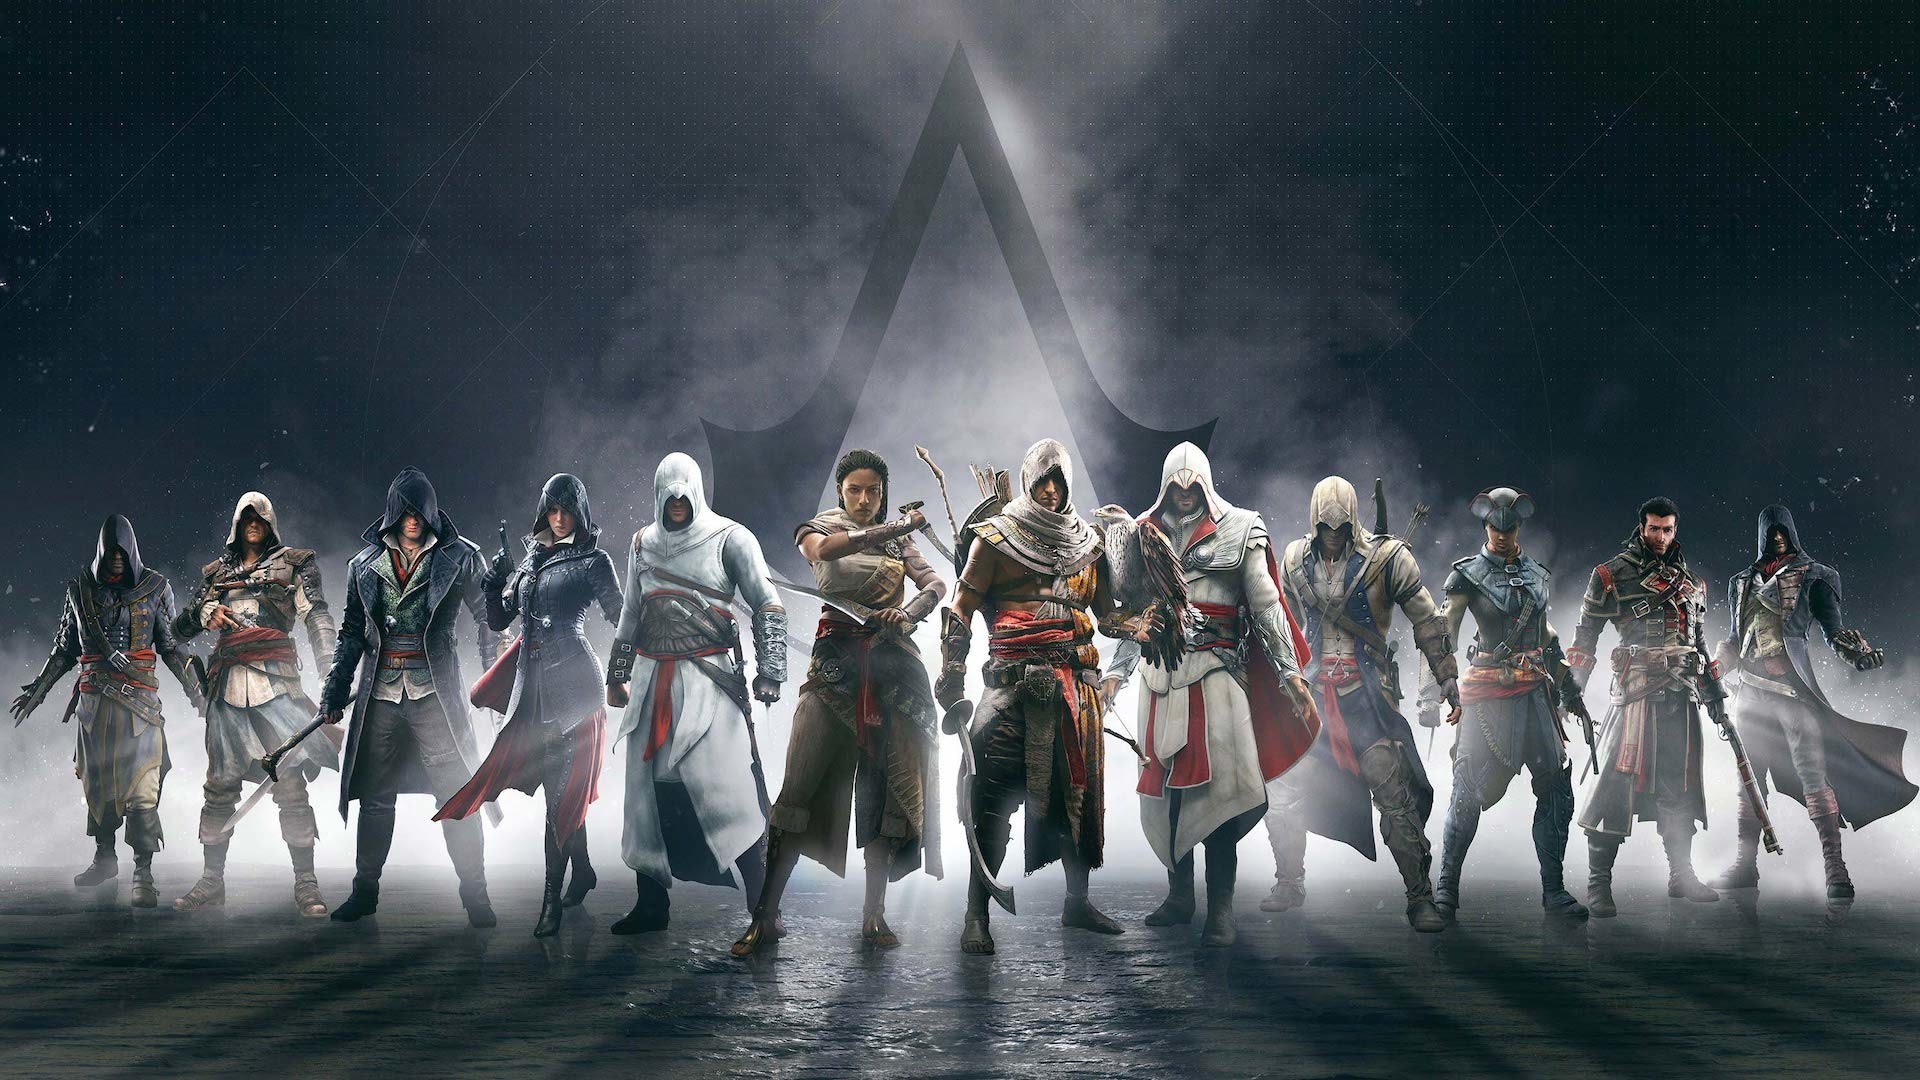 What Is The Creed Of Assassins